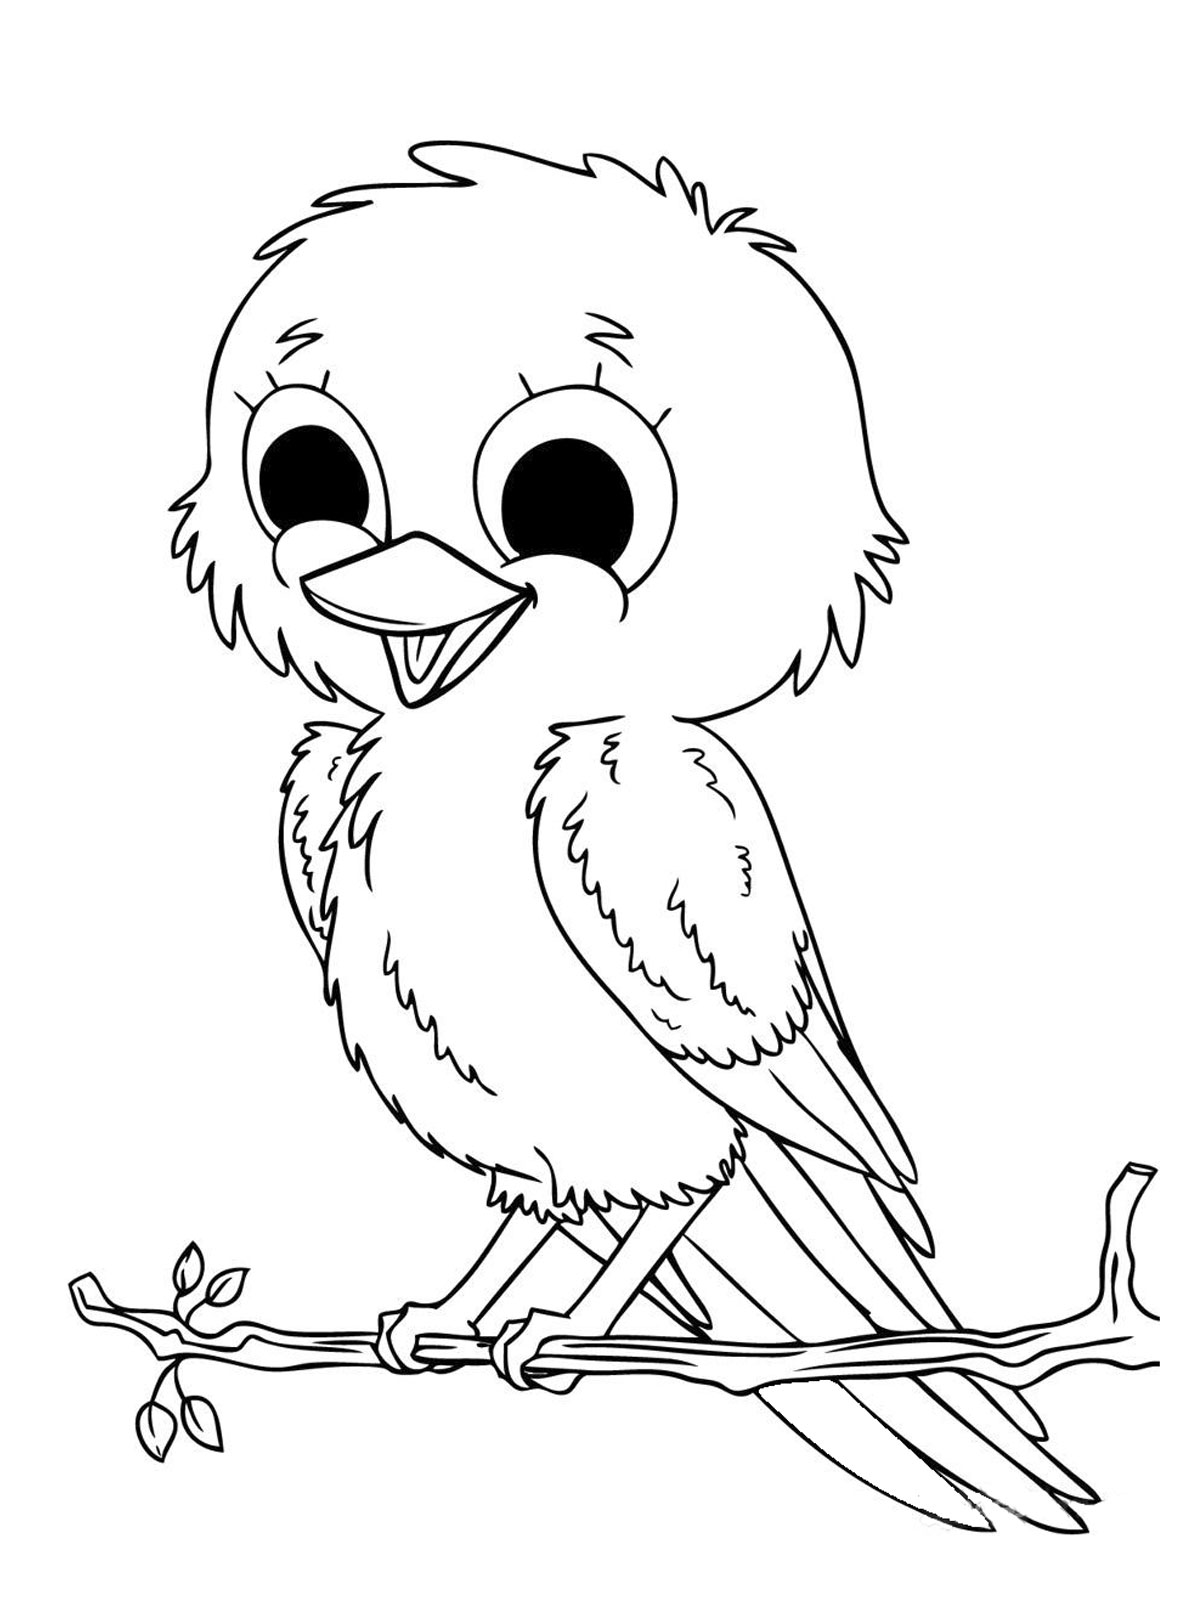 here-are-some-free-printable-coloring-pages-for-kids-be-strong-and